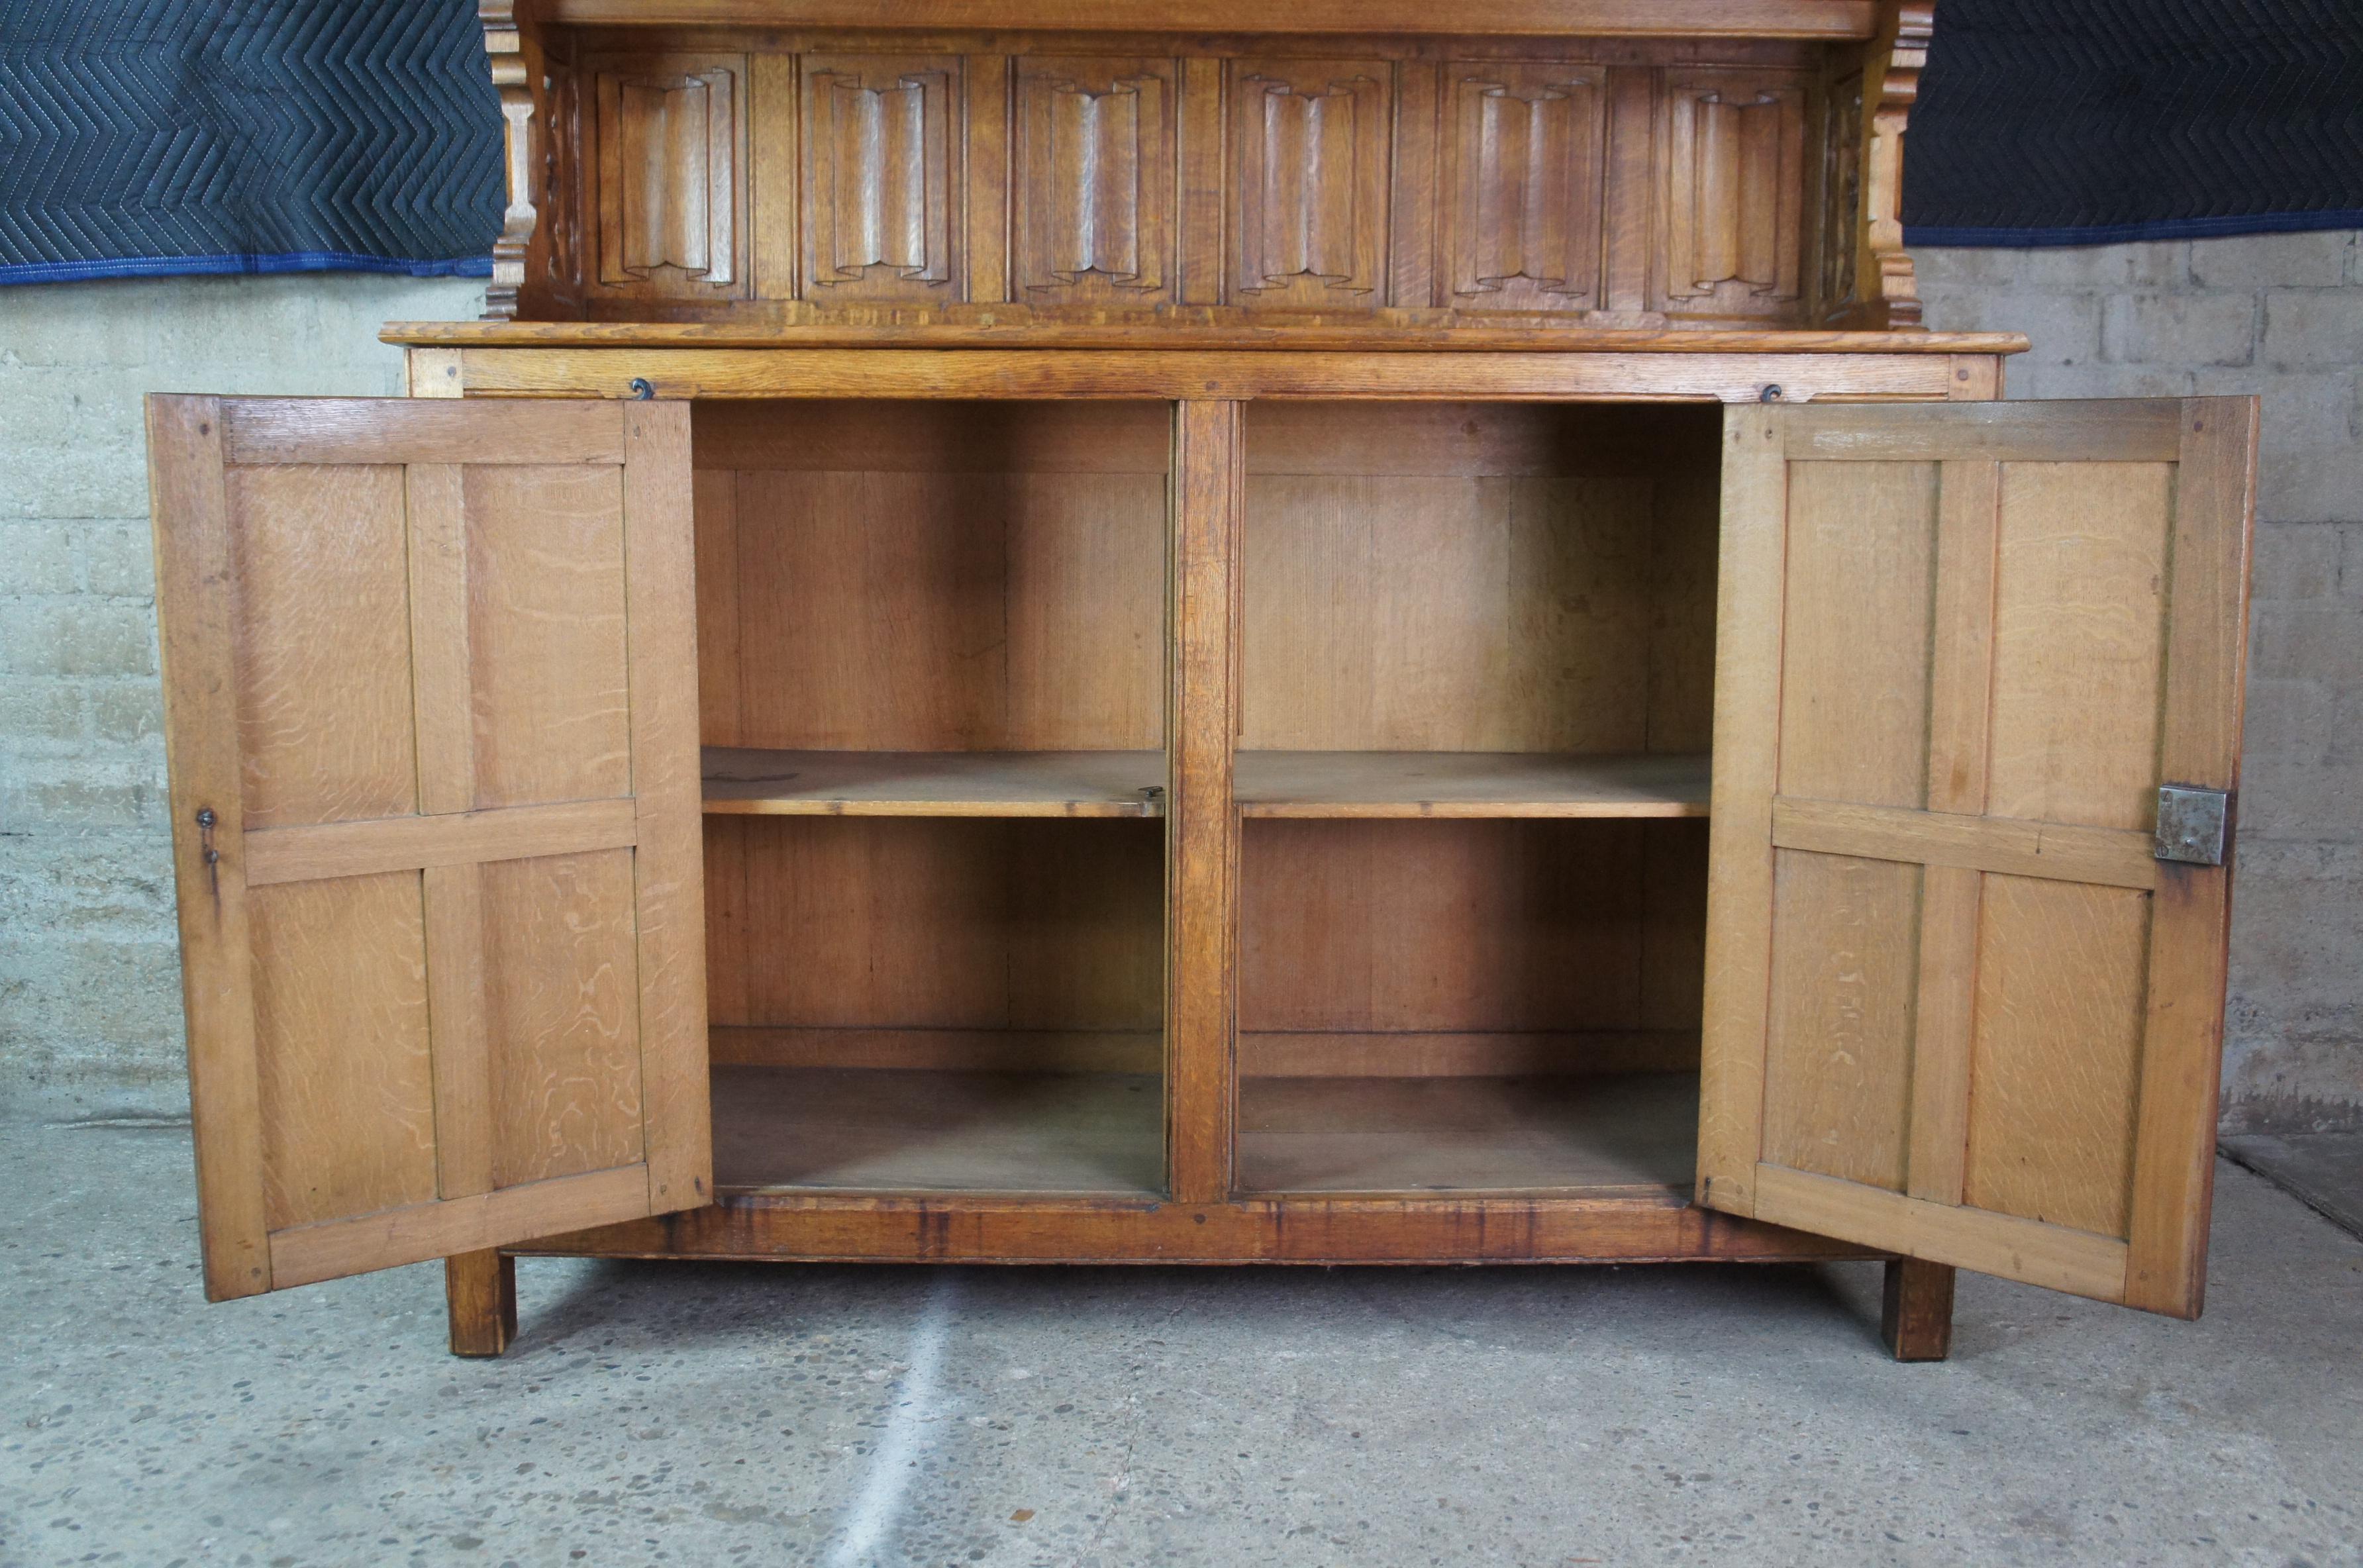 Antique French Gothic Revival Vaisselier Bar Cupboard Sideboard Hutch Linen Fold In Good Condition For Sale In Dayton, OH